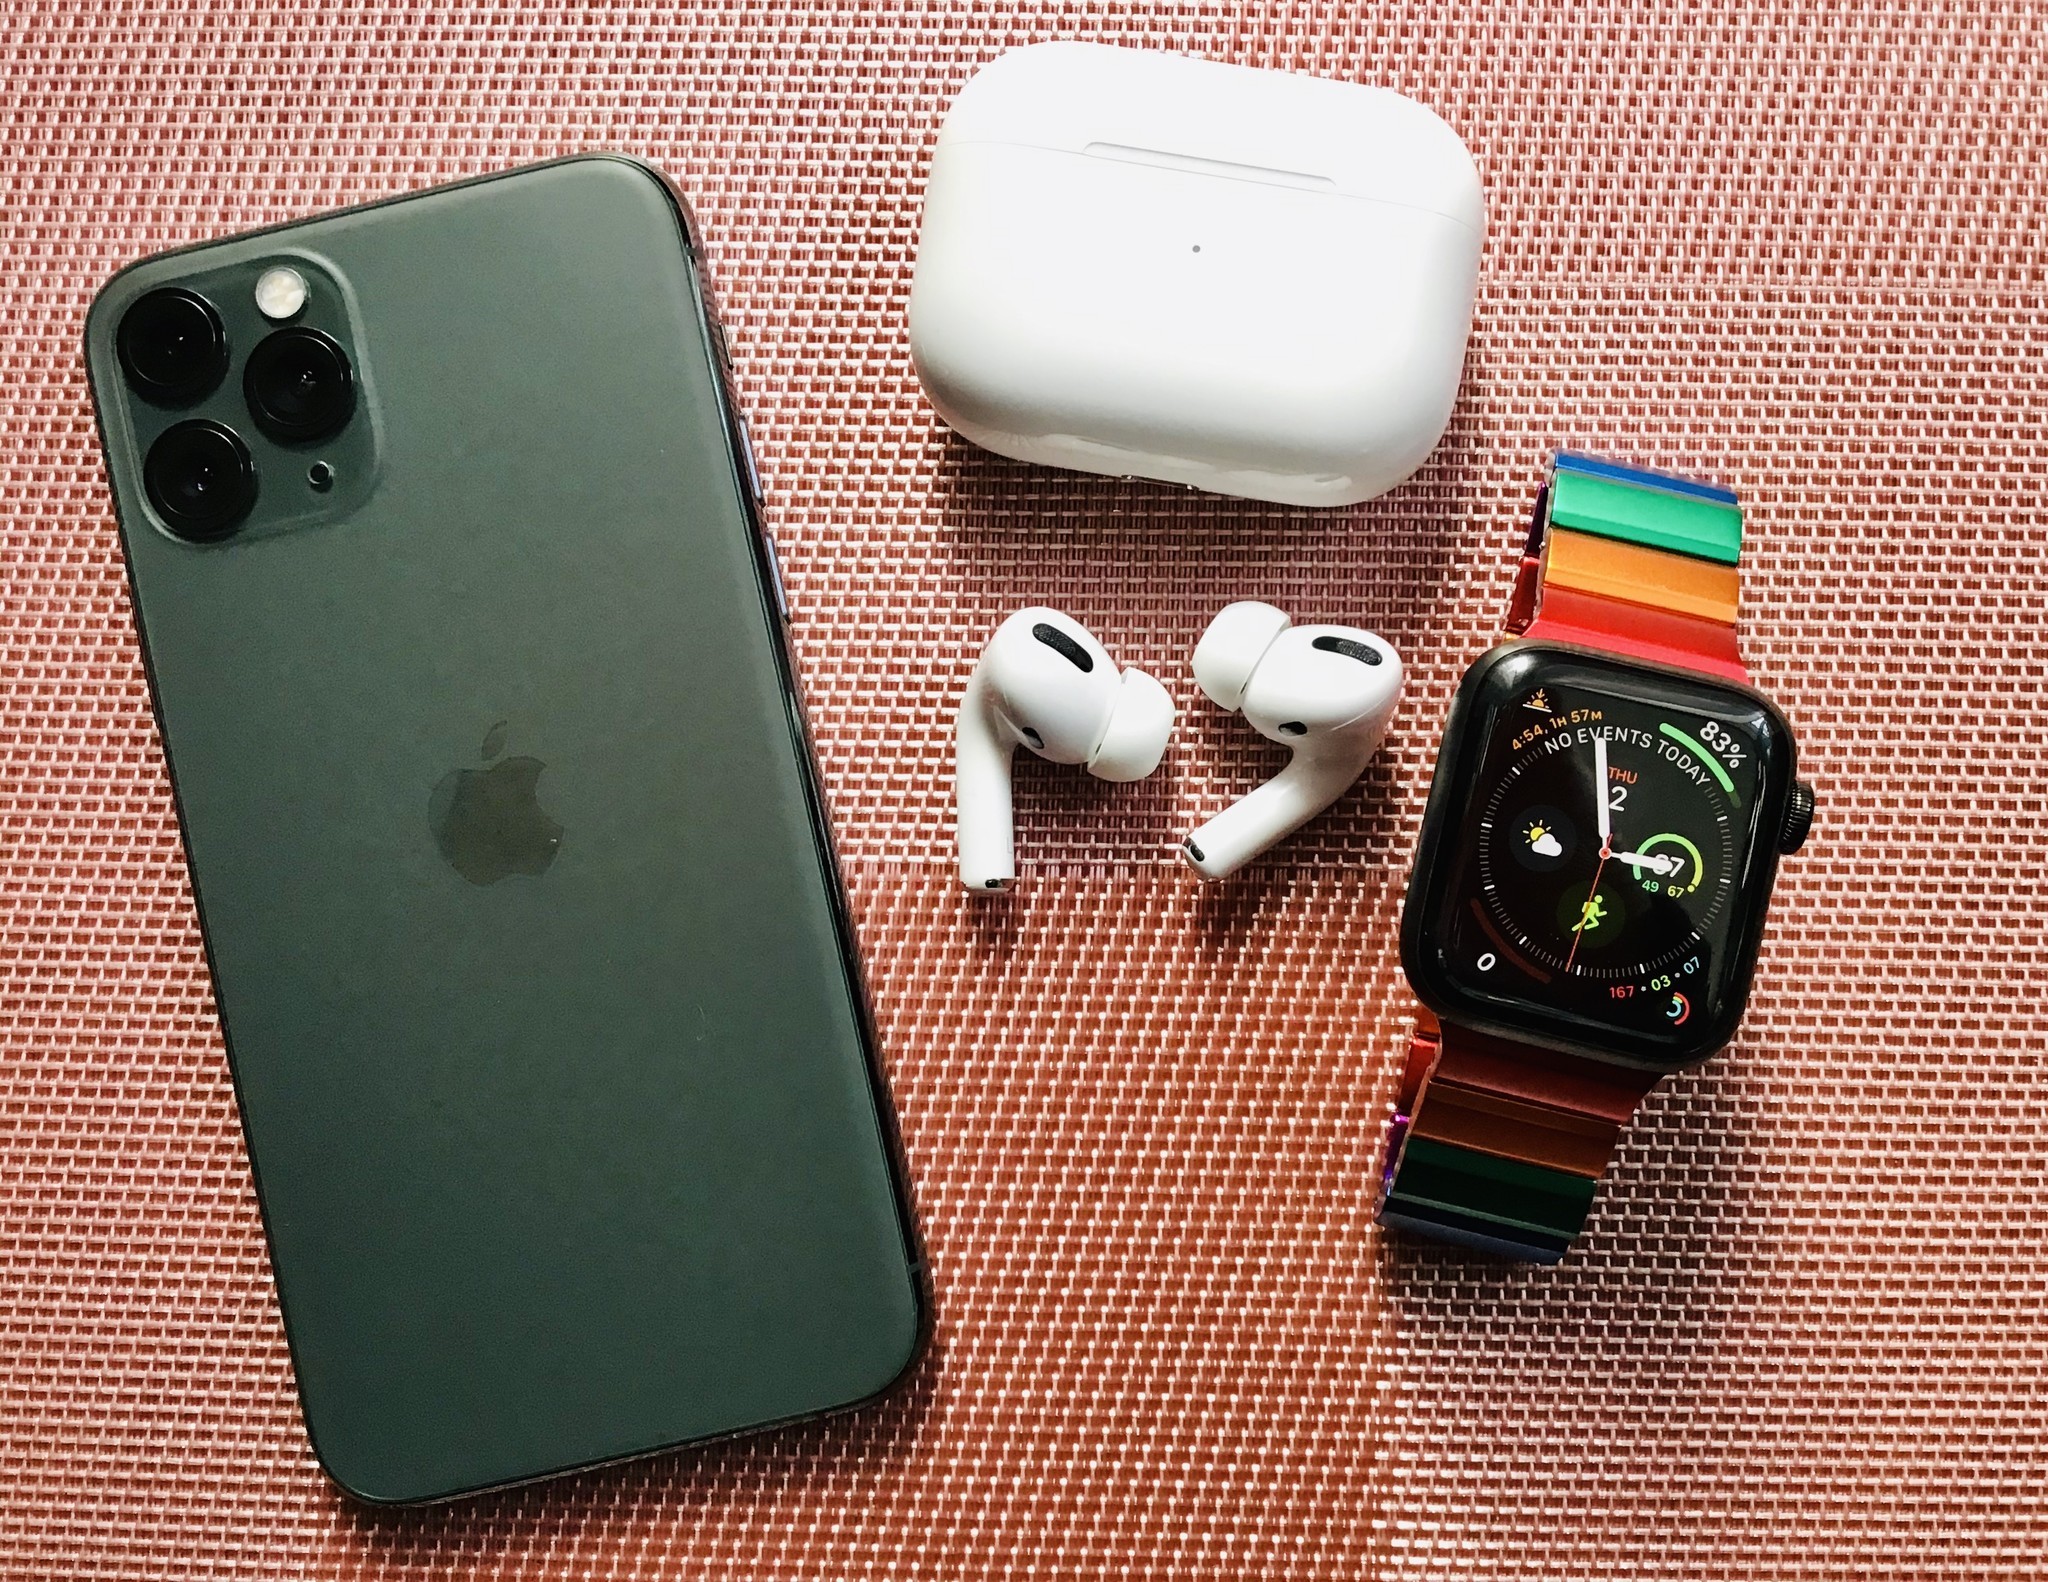 Midnight Green iPhone 11 Pro, AirPods Pro, and Apple Watch Series 5 Edition Space Black Titanium with JUUK Rainbow Ligero Band